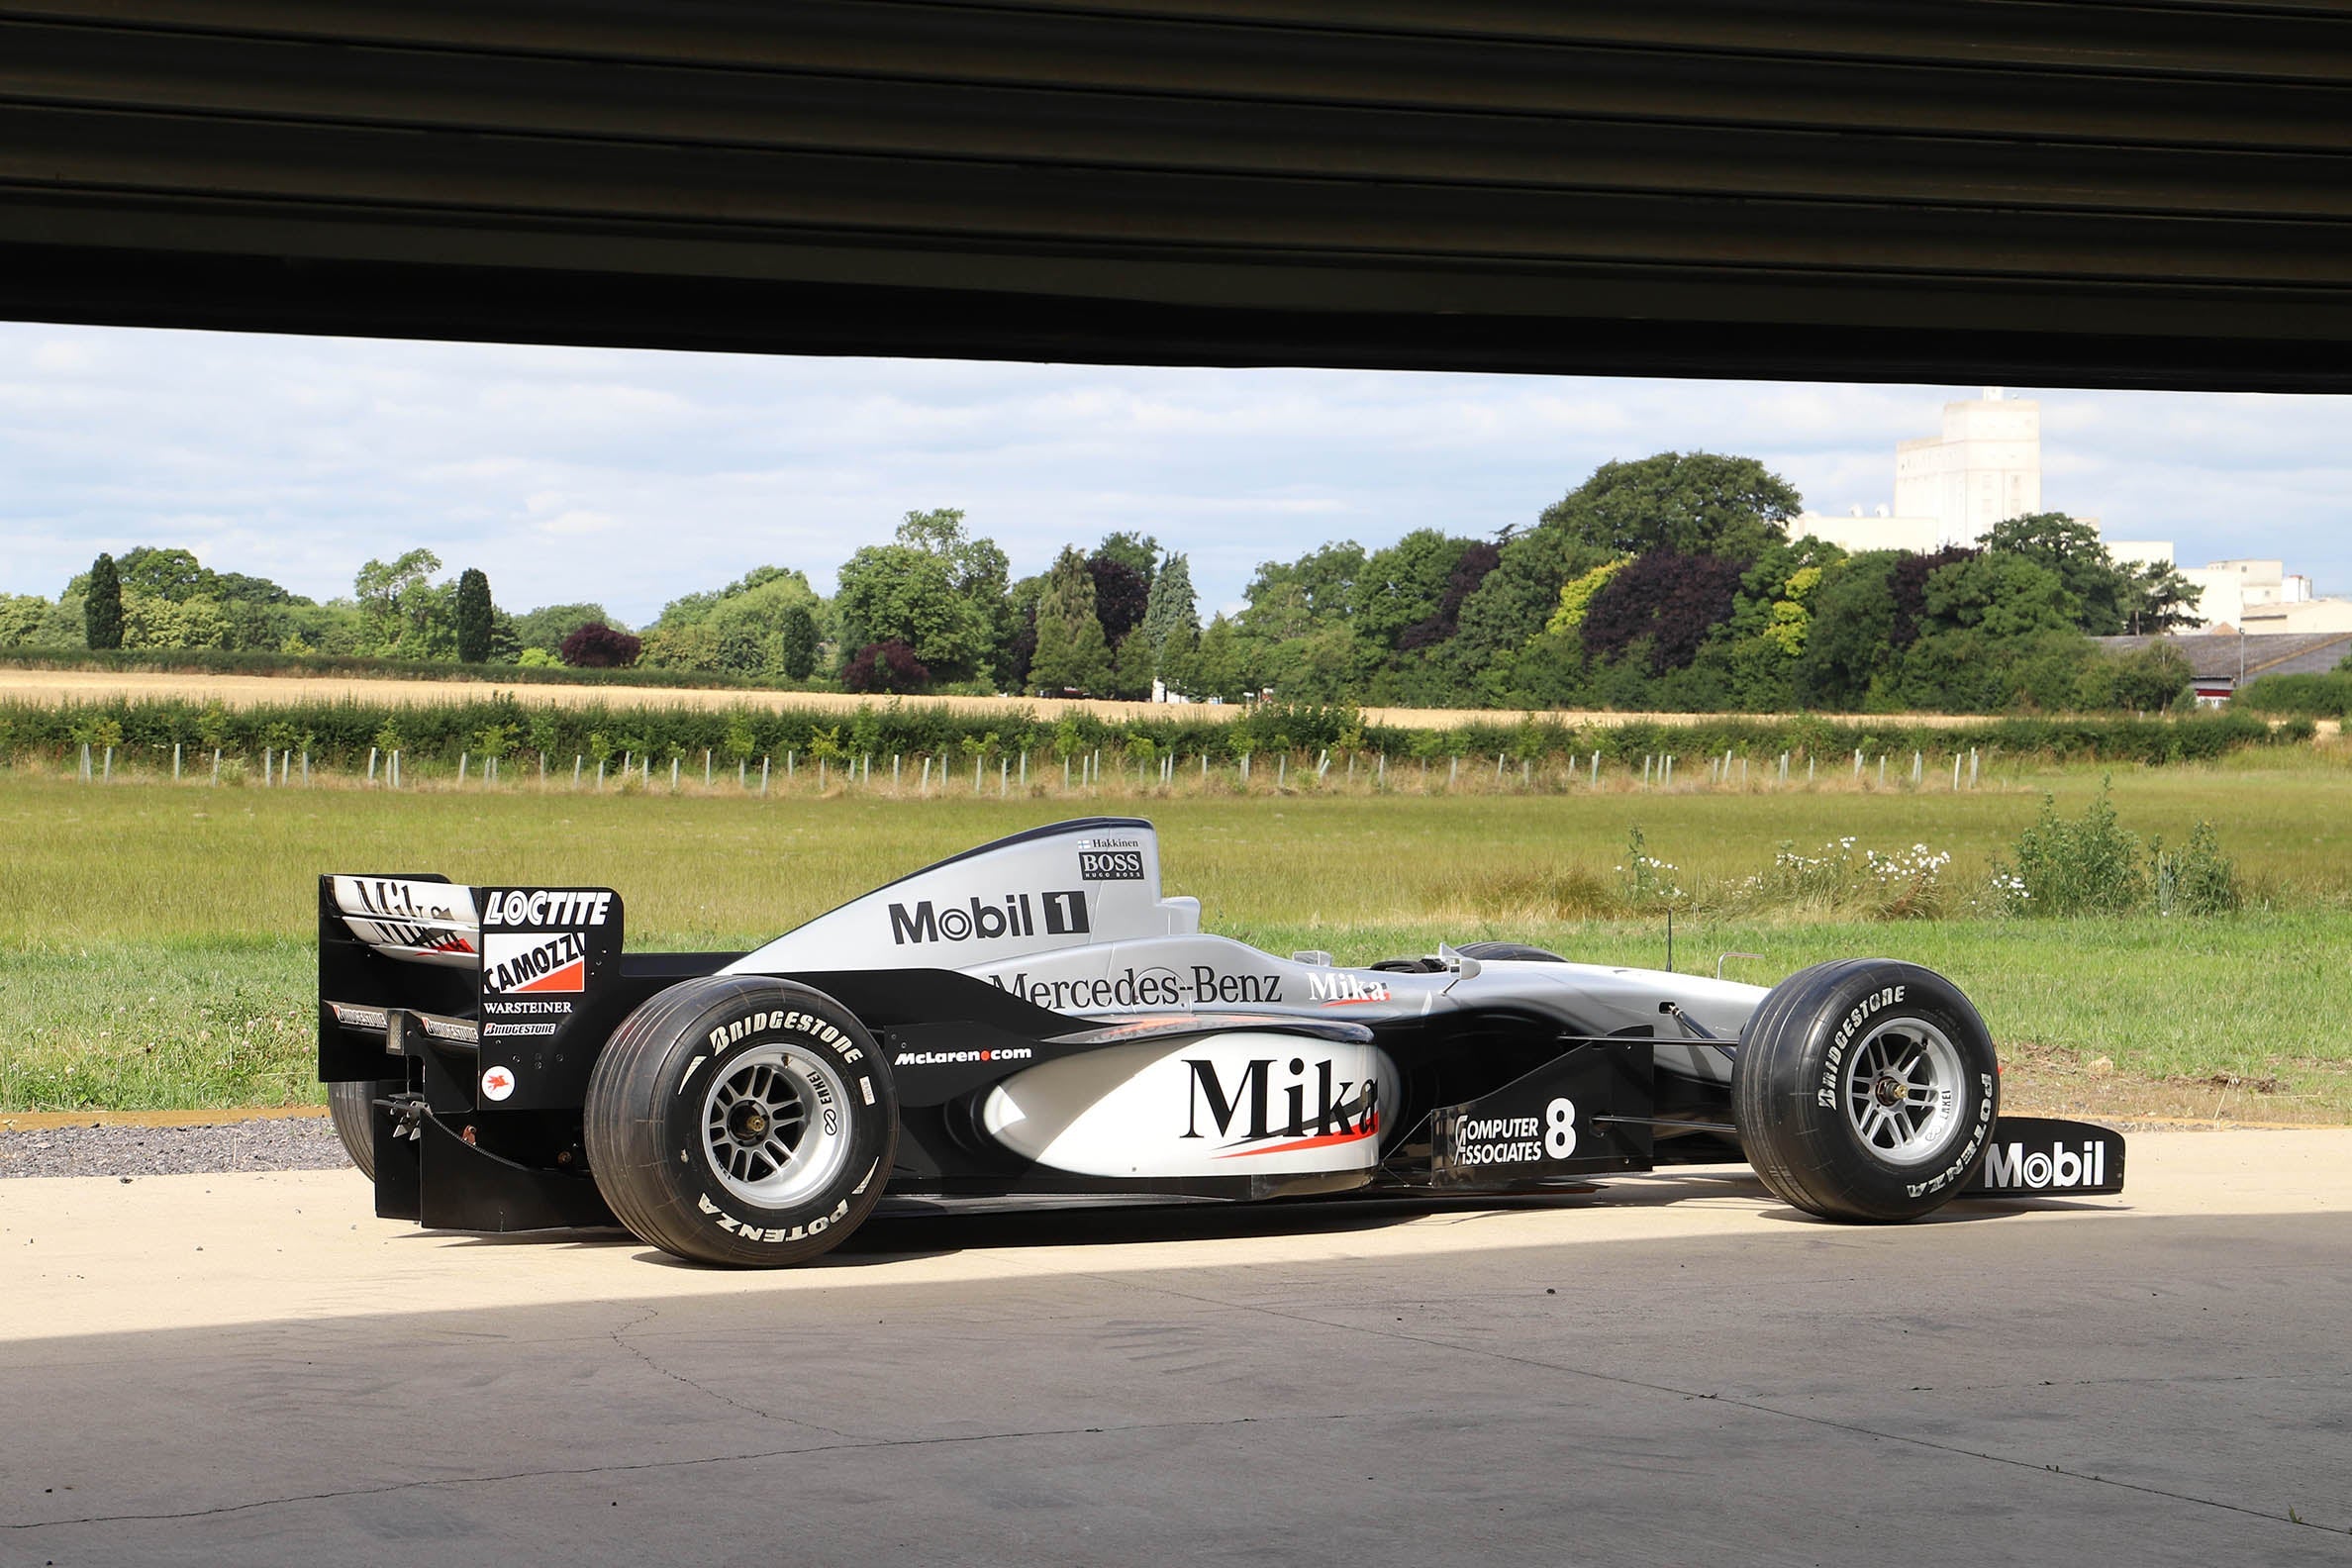 1997 McLaren MP4-12 Official Show Car With MP4-13 Livery